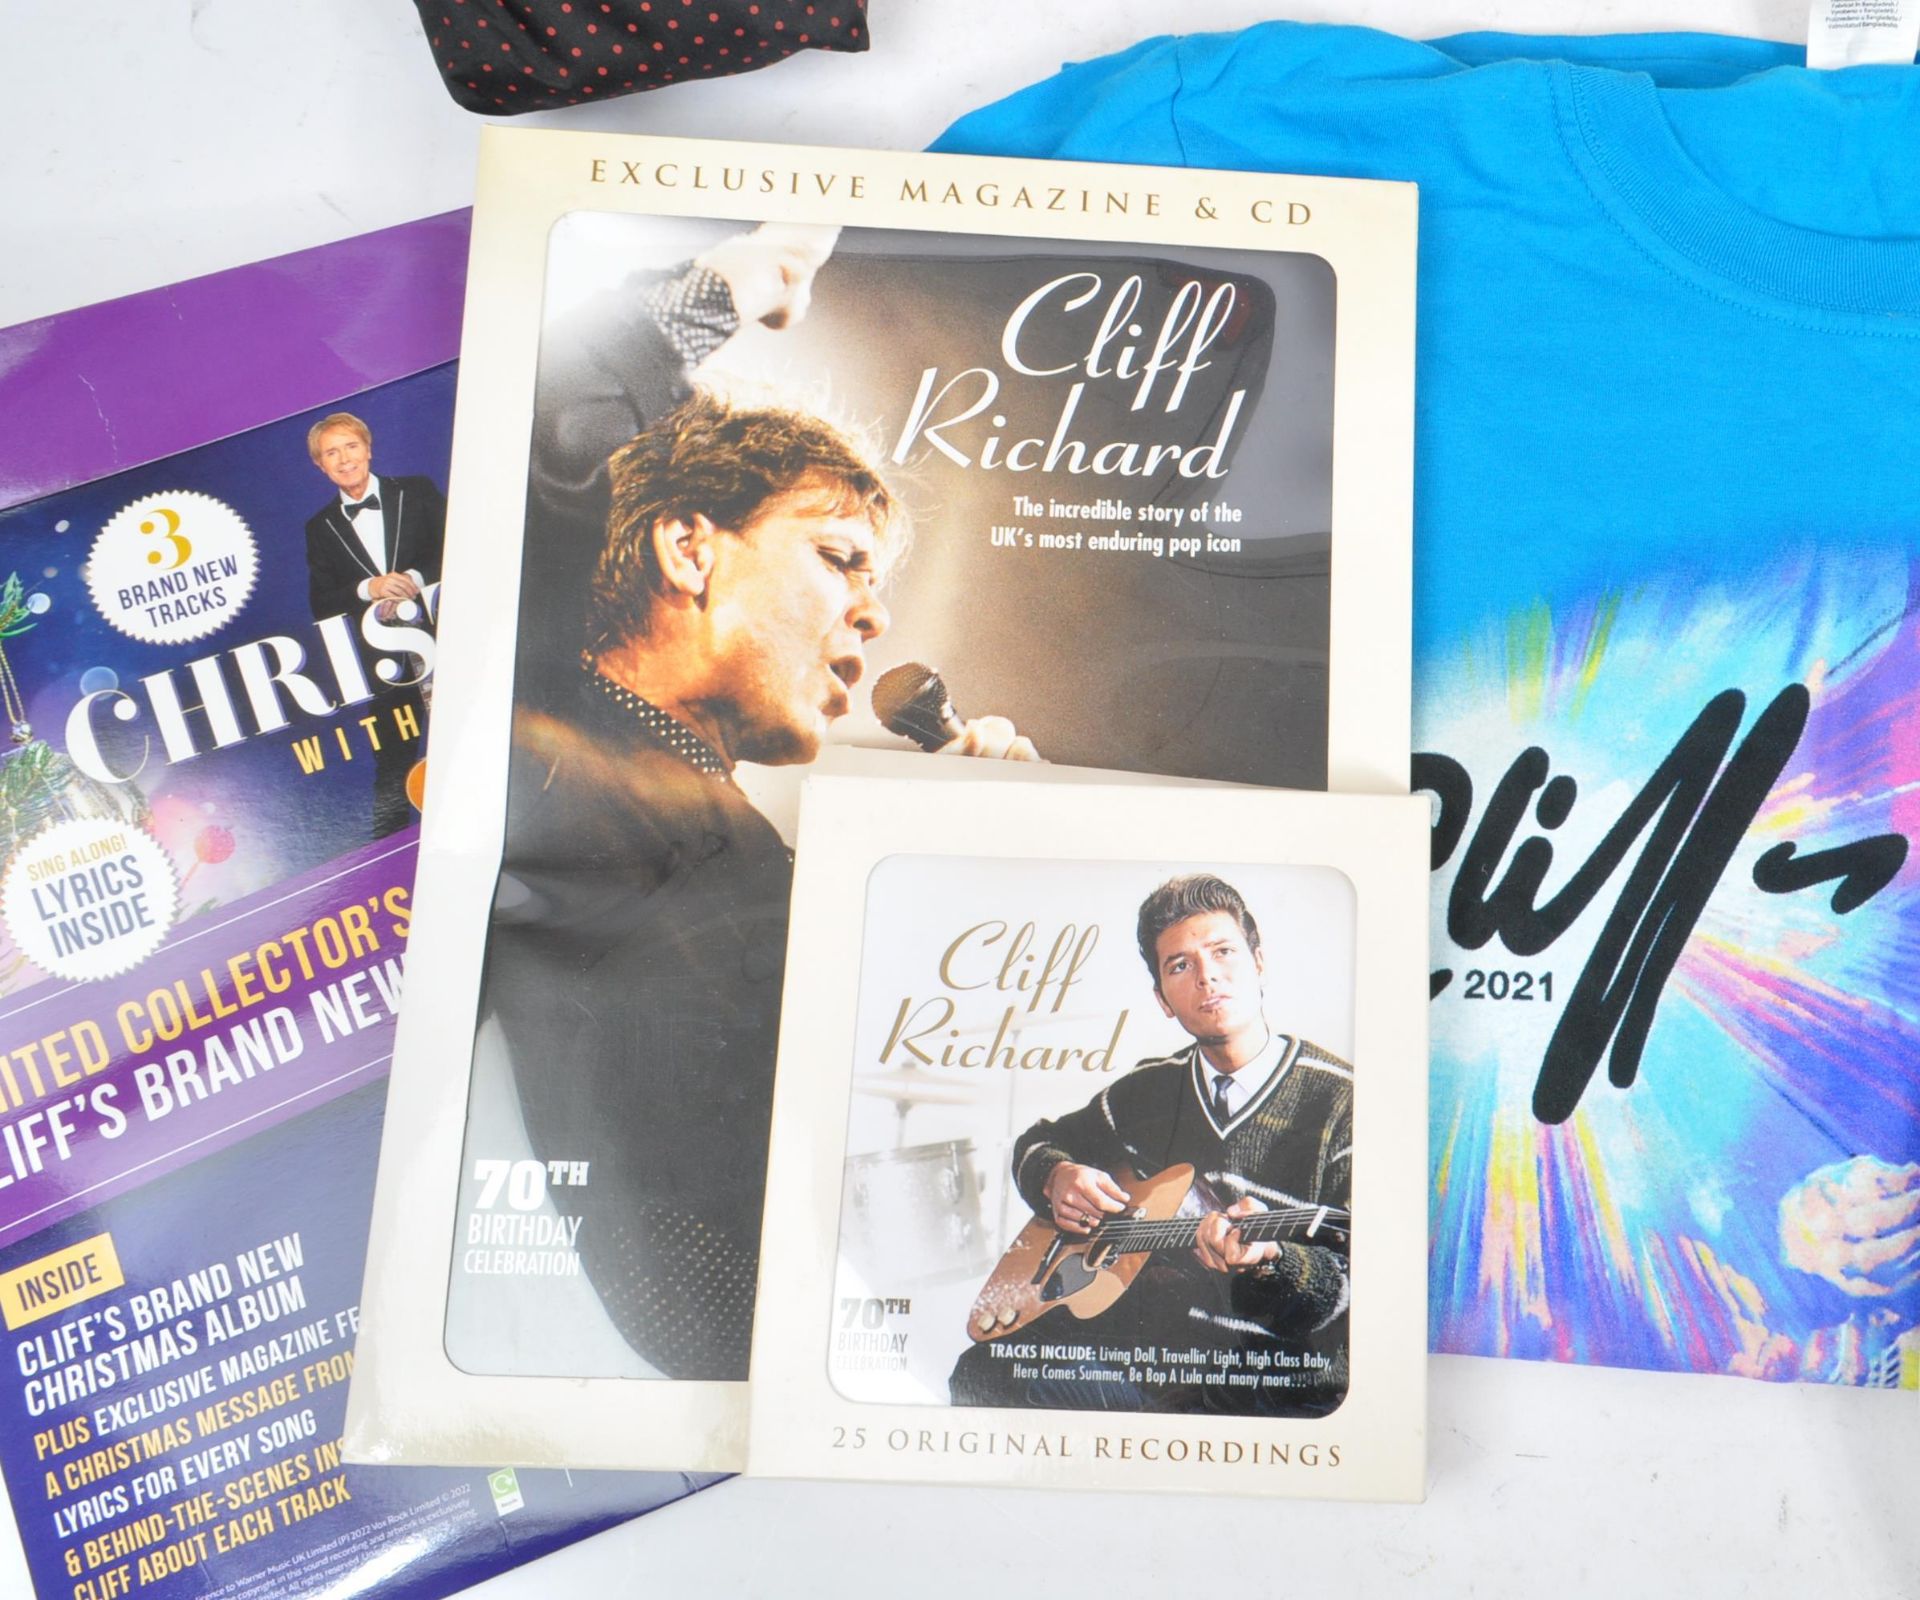 SIR CLIFF RICHARD - COLLECTION OF MEMORABILIA / MERCHANDISE - Image 3 of 6